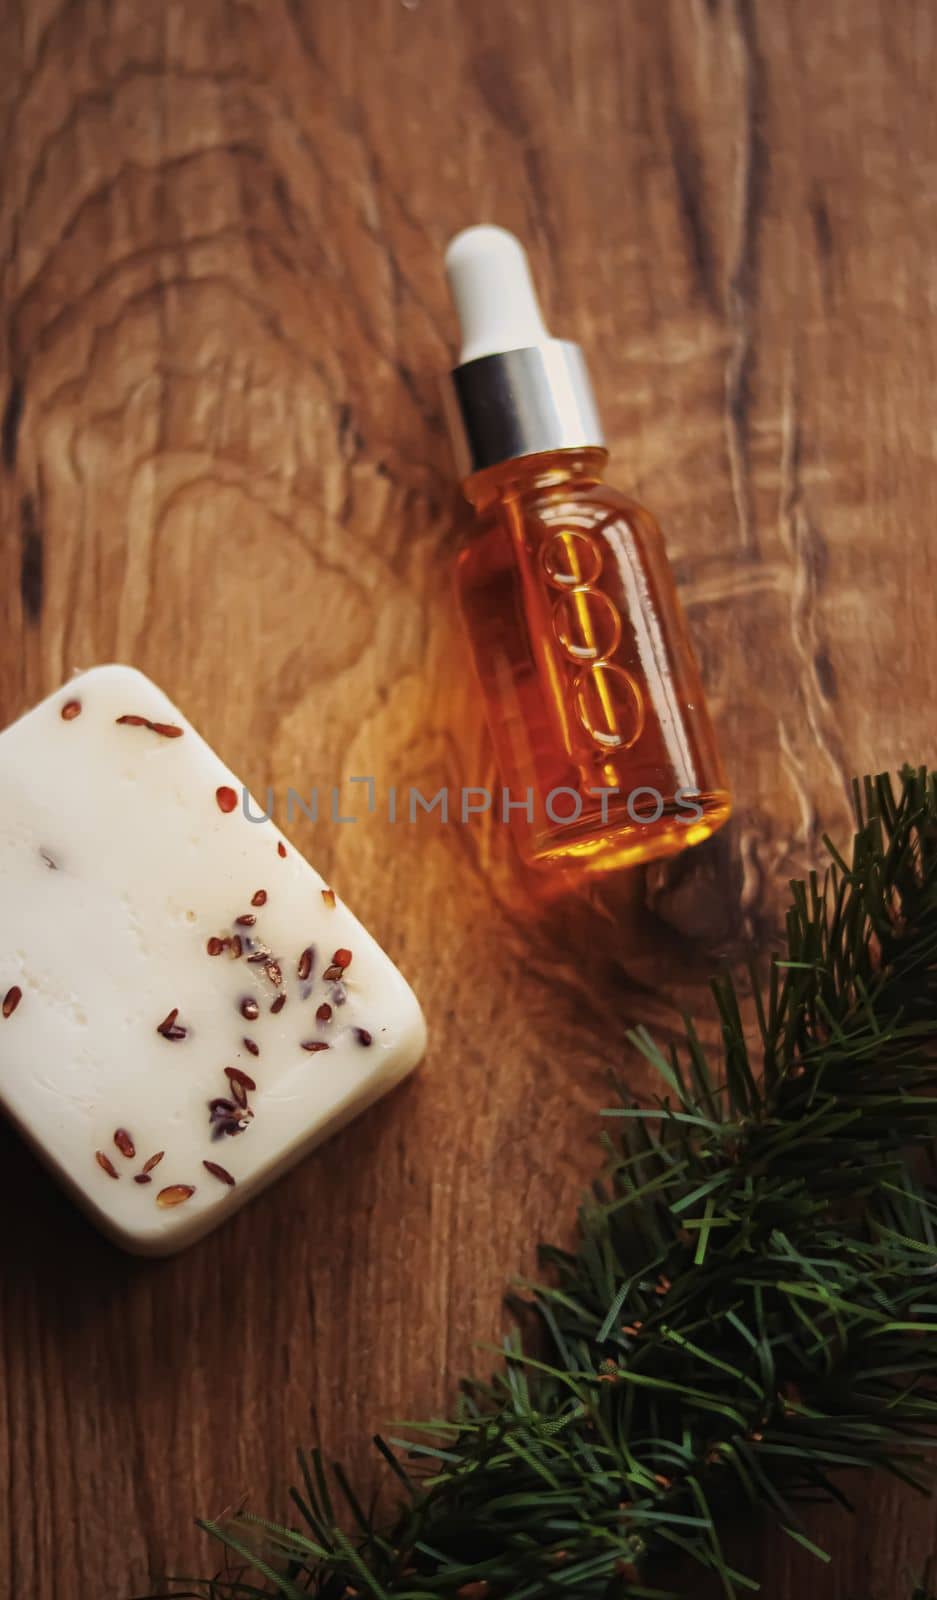 Oil serum bottle and natural herbal handmade soap, beauty and skincare product.